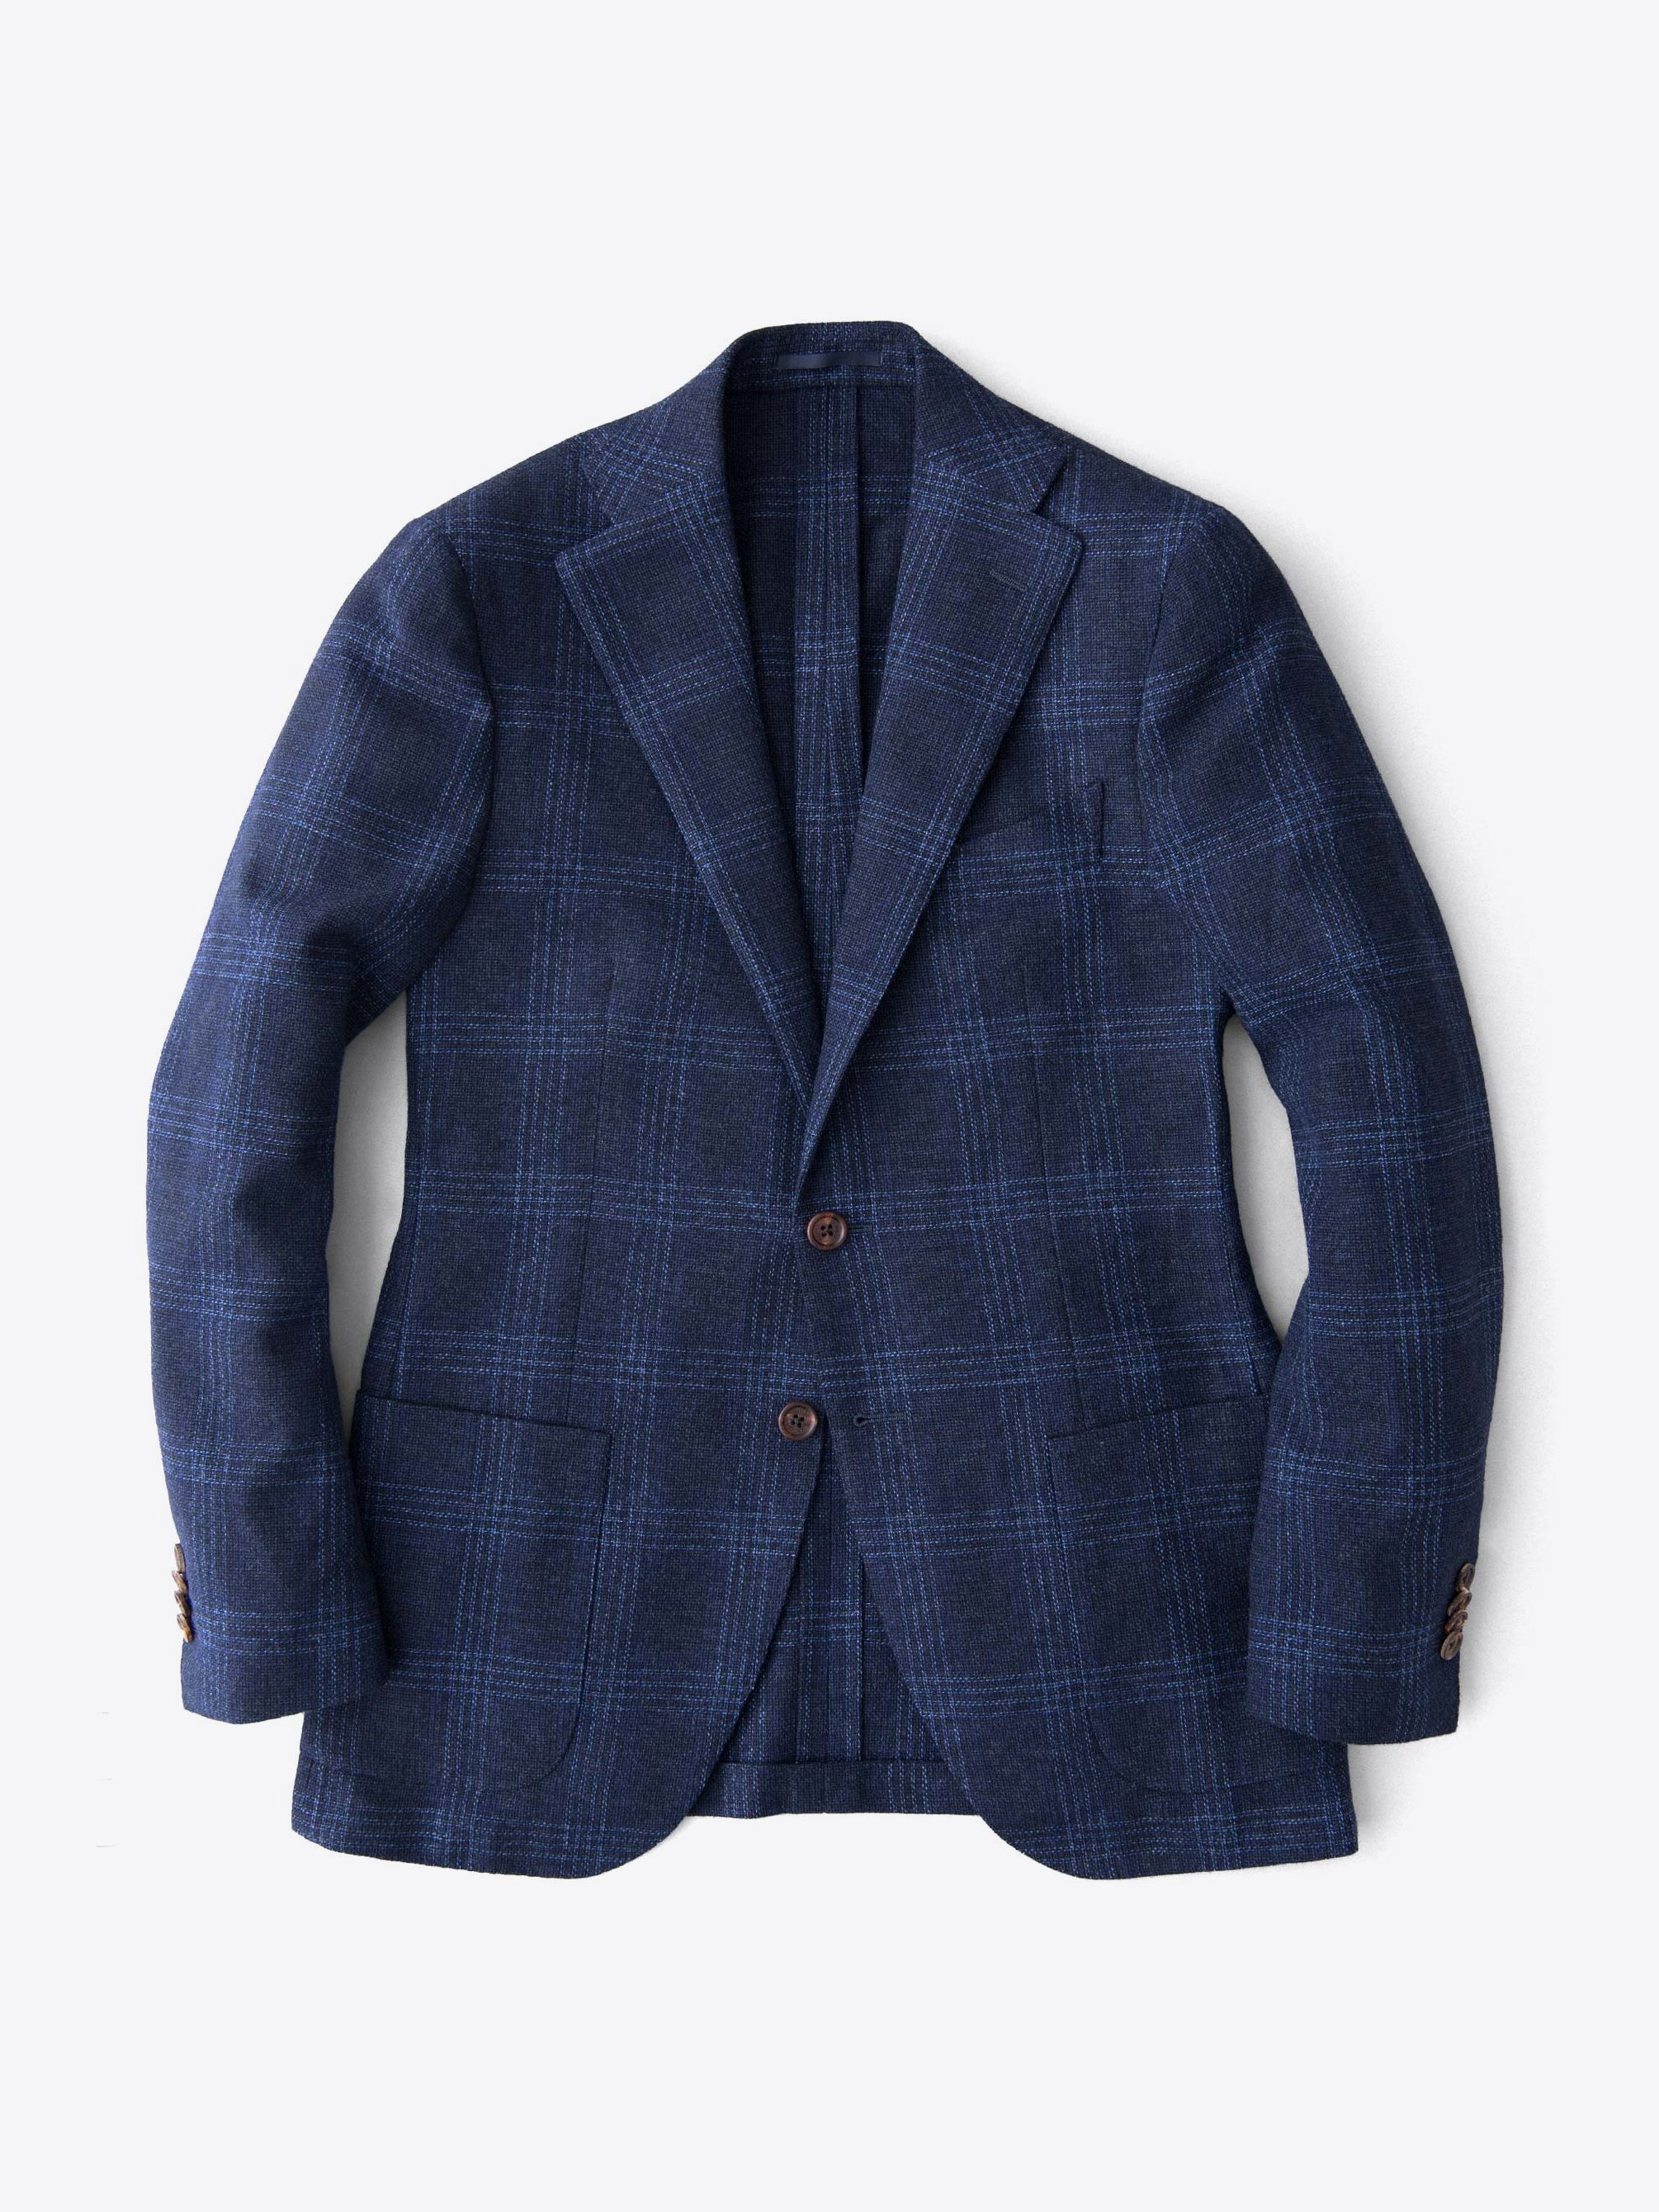 Zoom Image of Hudson Navy and Blue Check Textured Wool Jacket